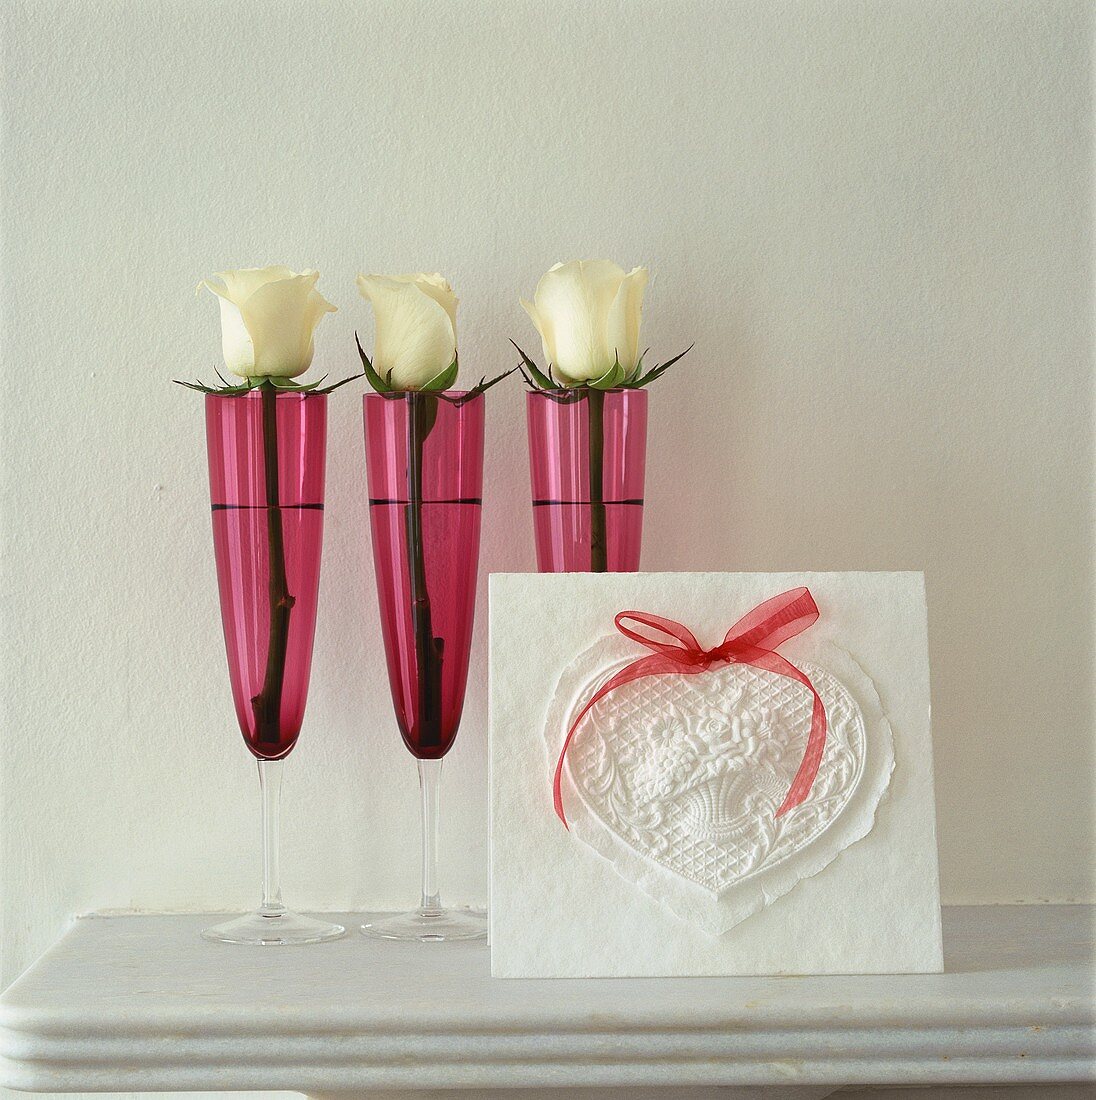 Three white roses in pink champagne glasses